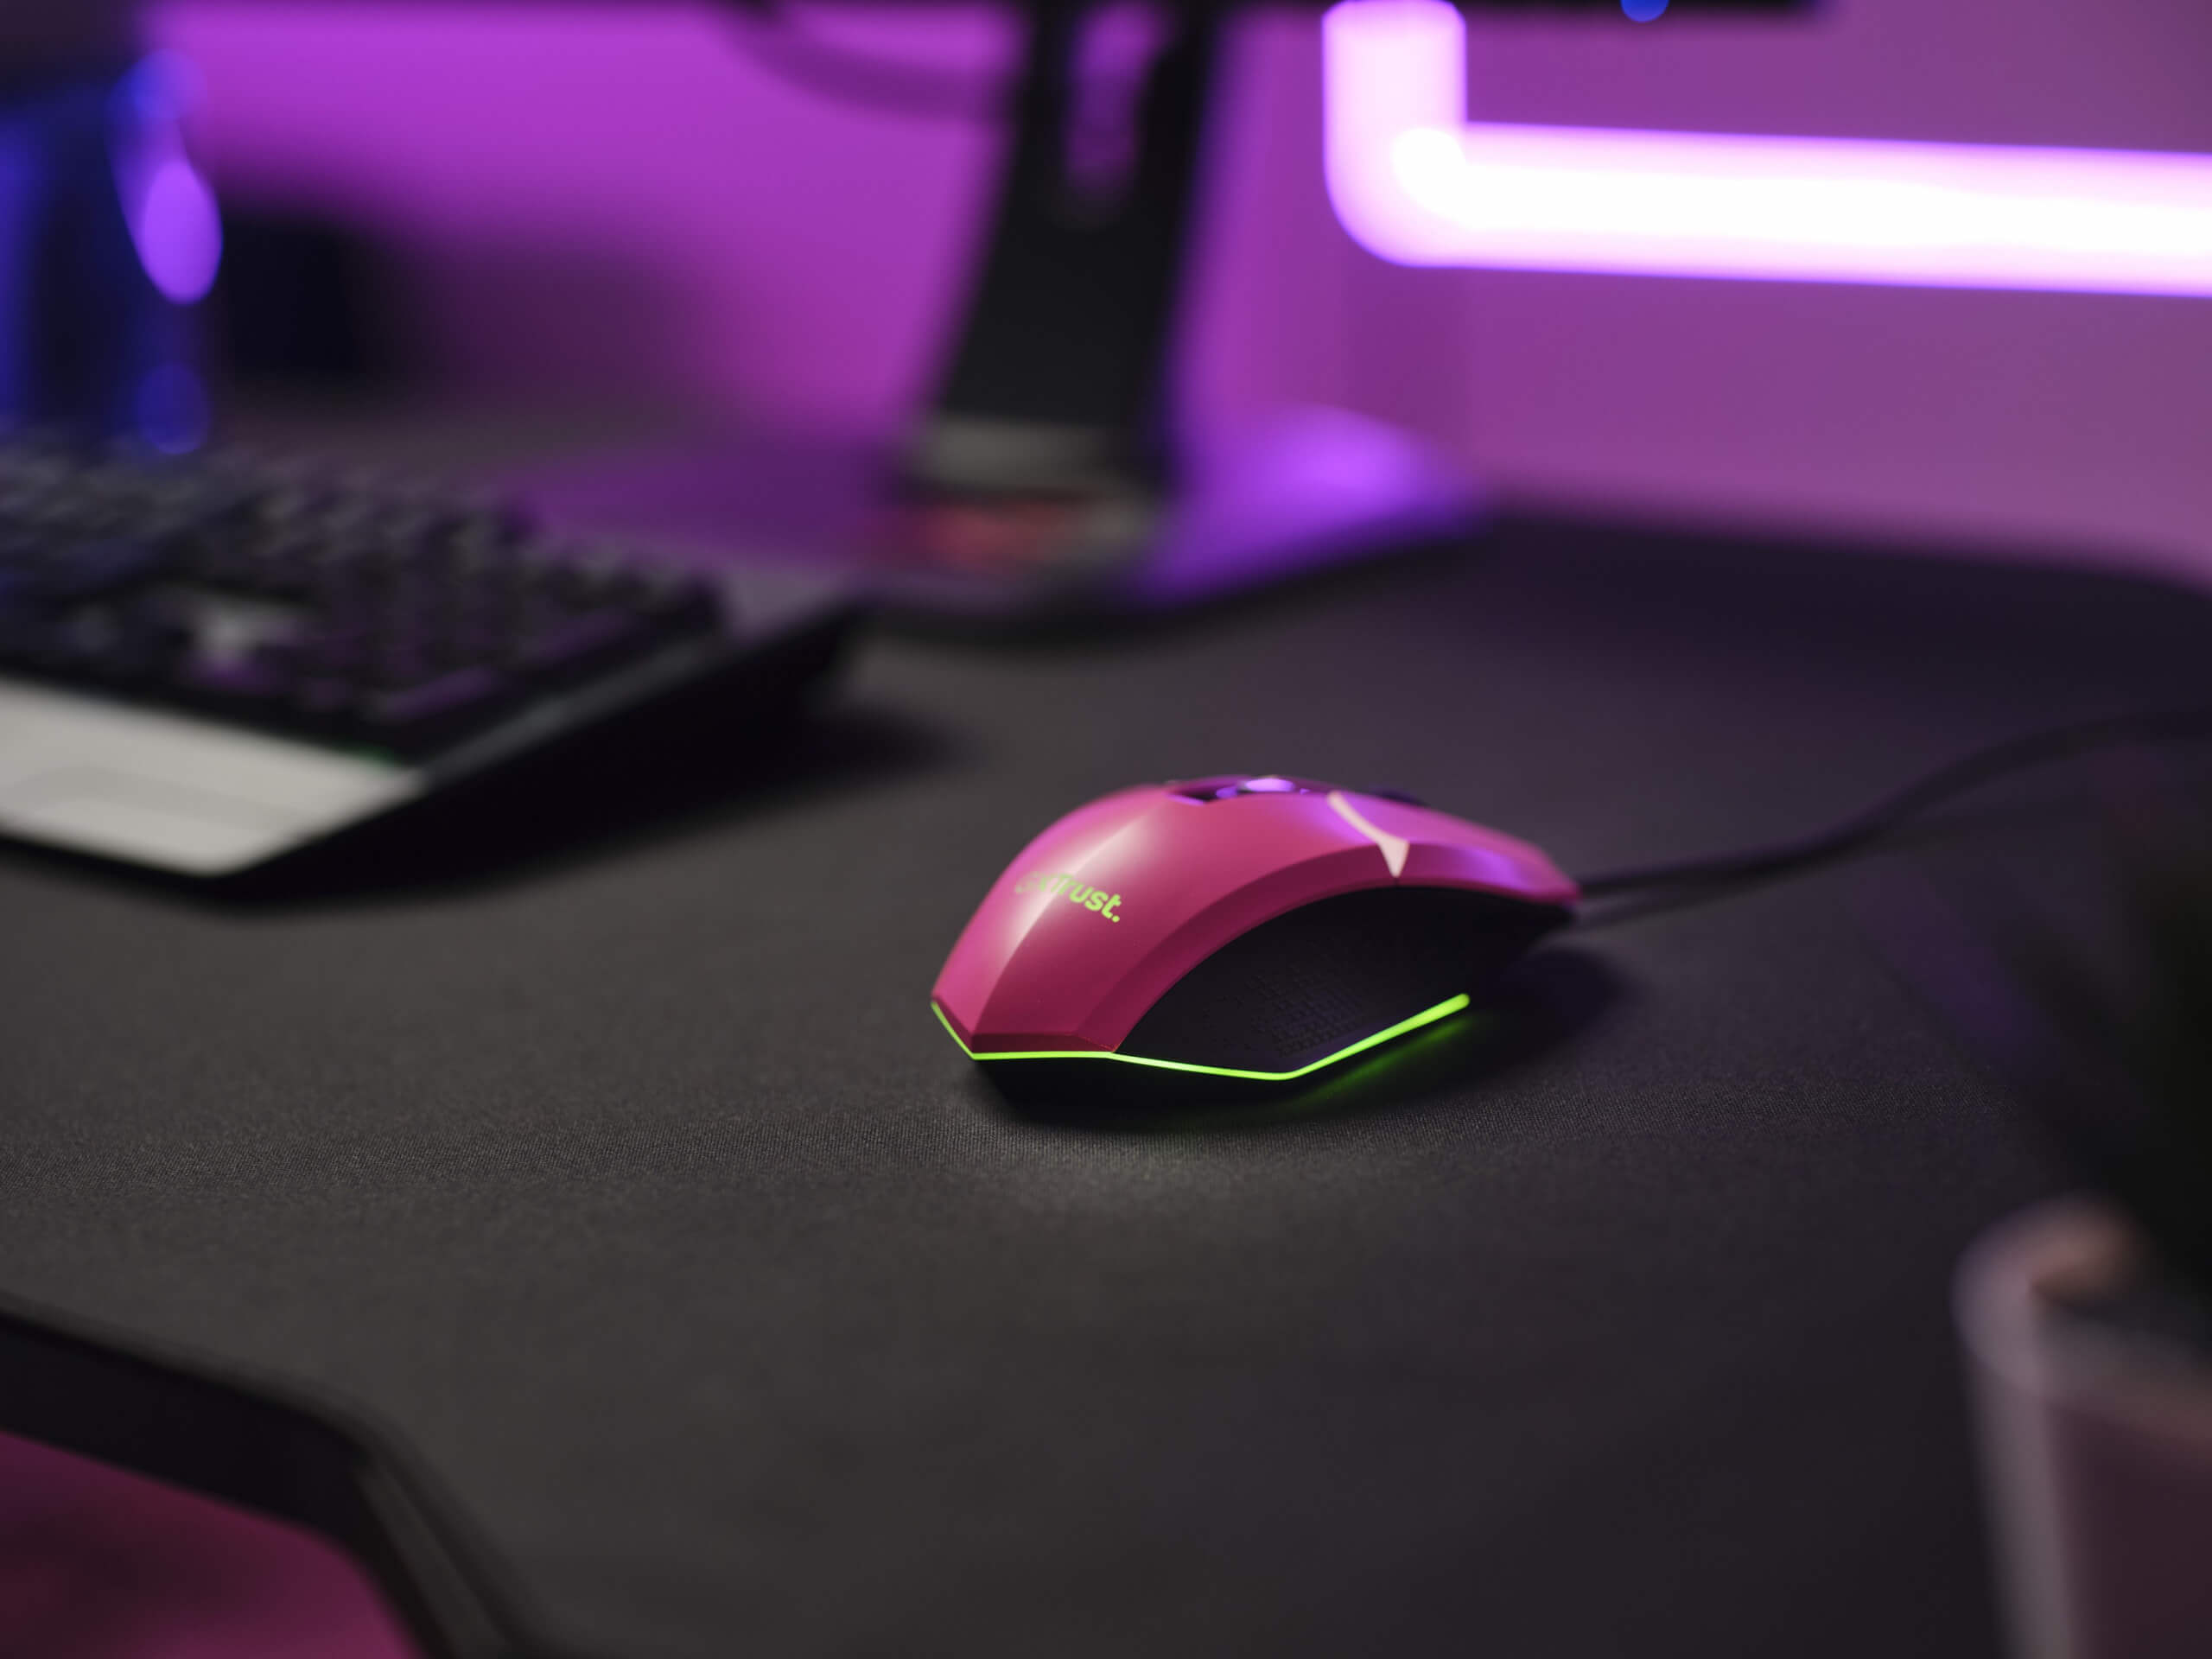 image showing the trust gaming mouse on a desktop. With pink colouring and a green rgb strip along the bottom of the mouse. in the background is a keyboard and other neon lights.